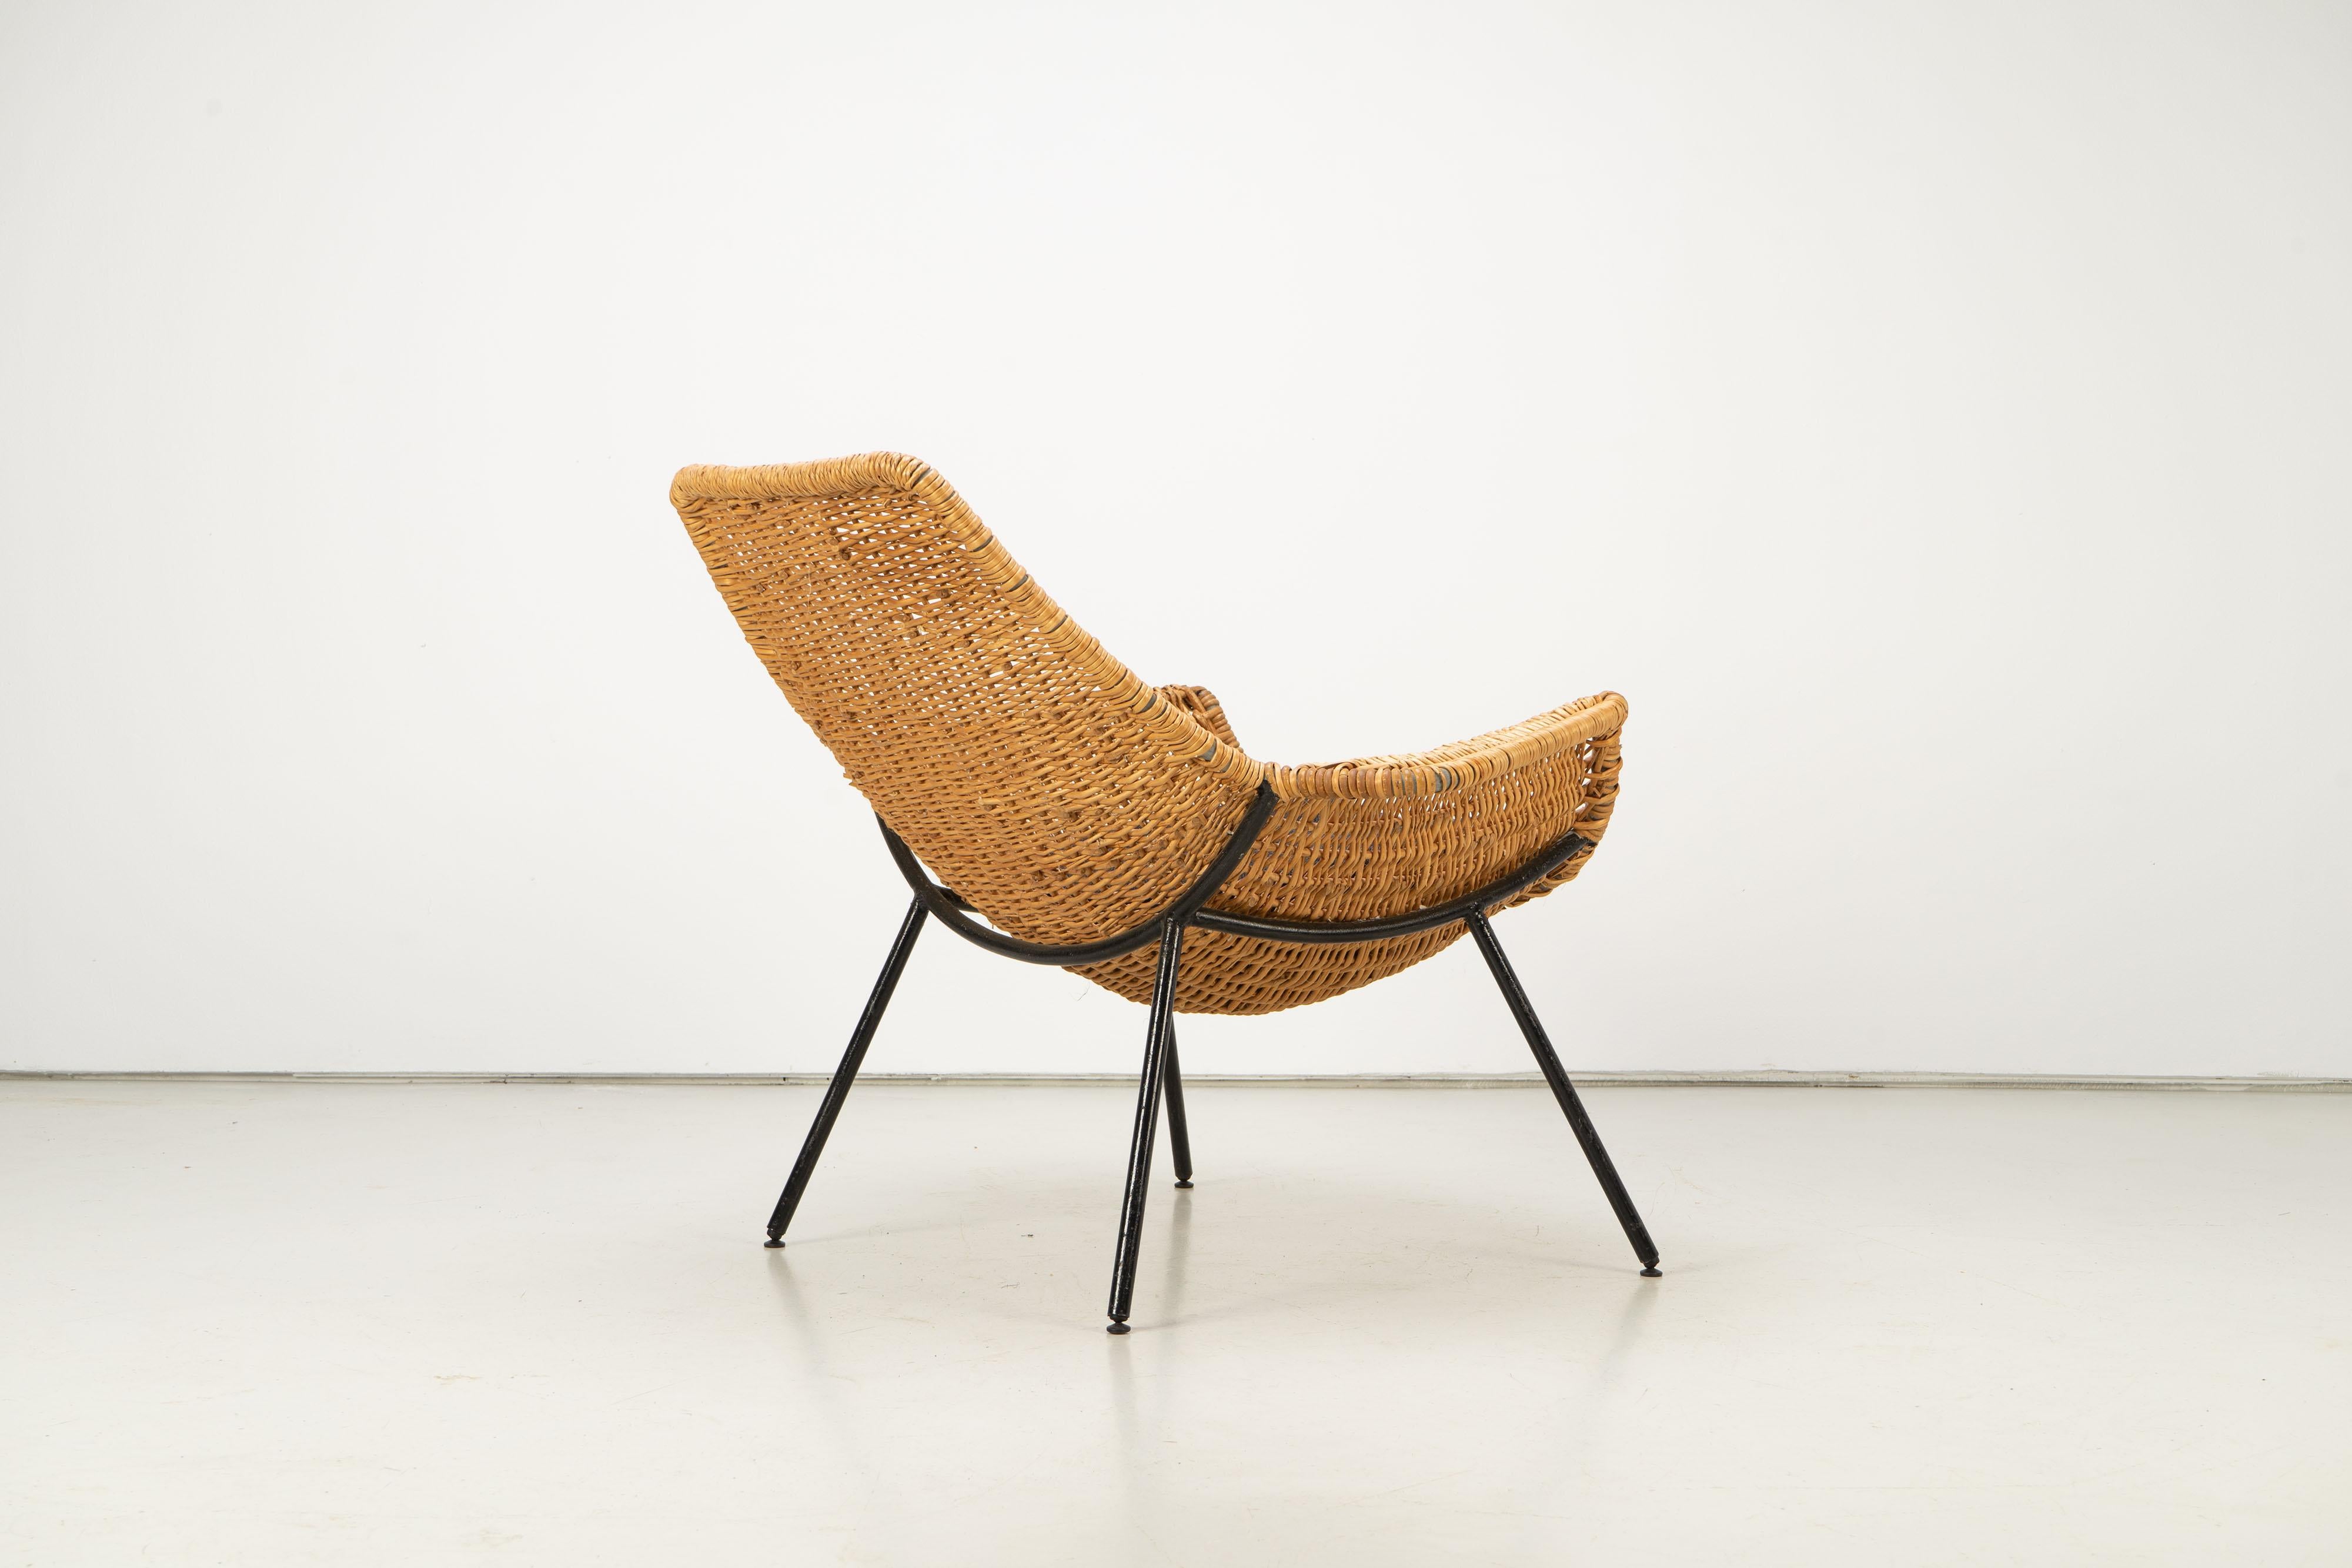 Mid-Century Modern Rattan Lounge Chair by Giancarlo De Carlo Italy, 1954 For Sale 2